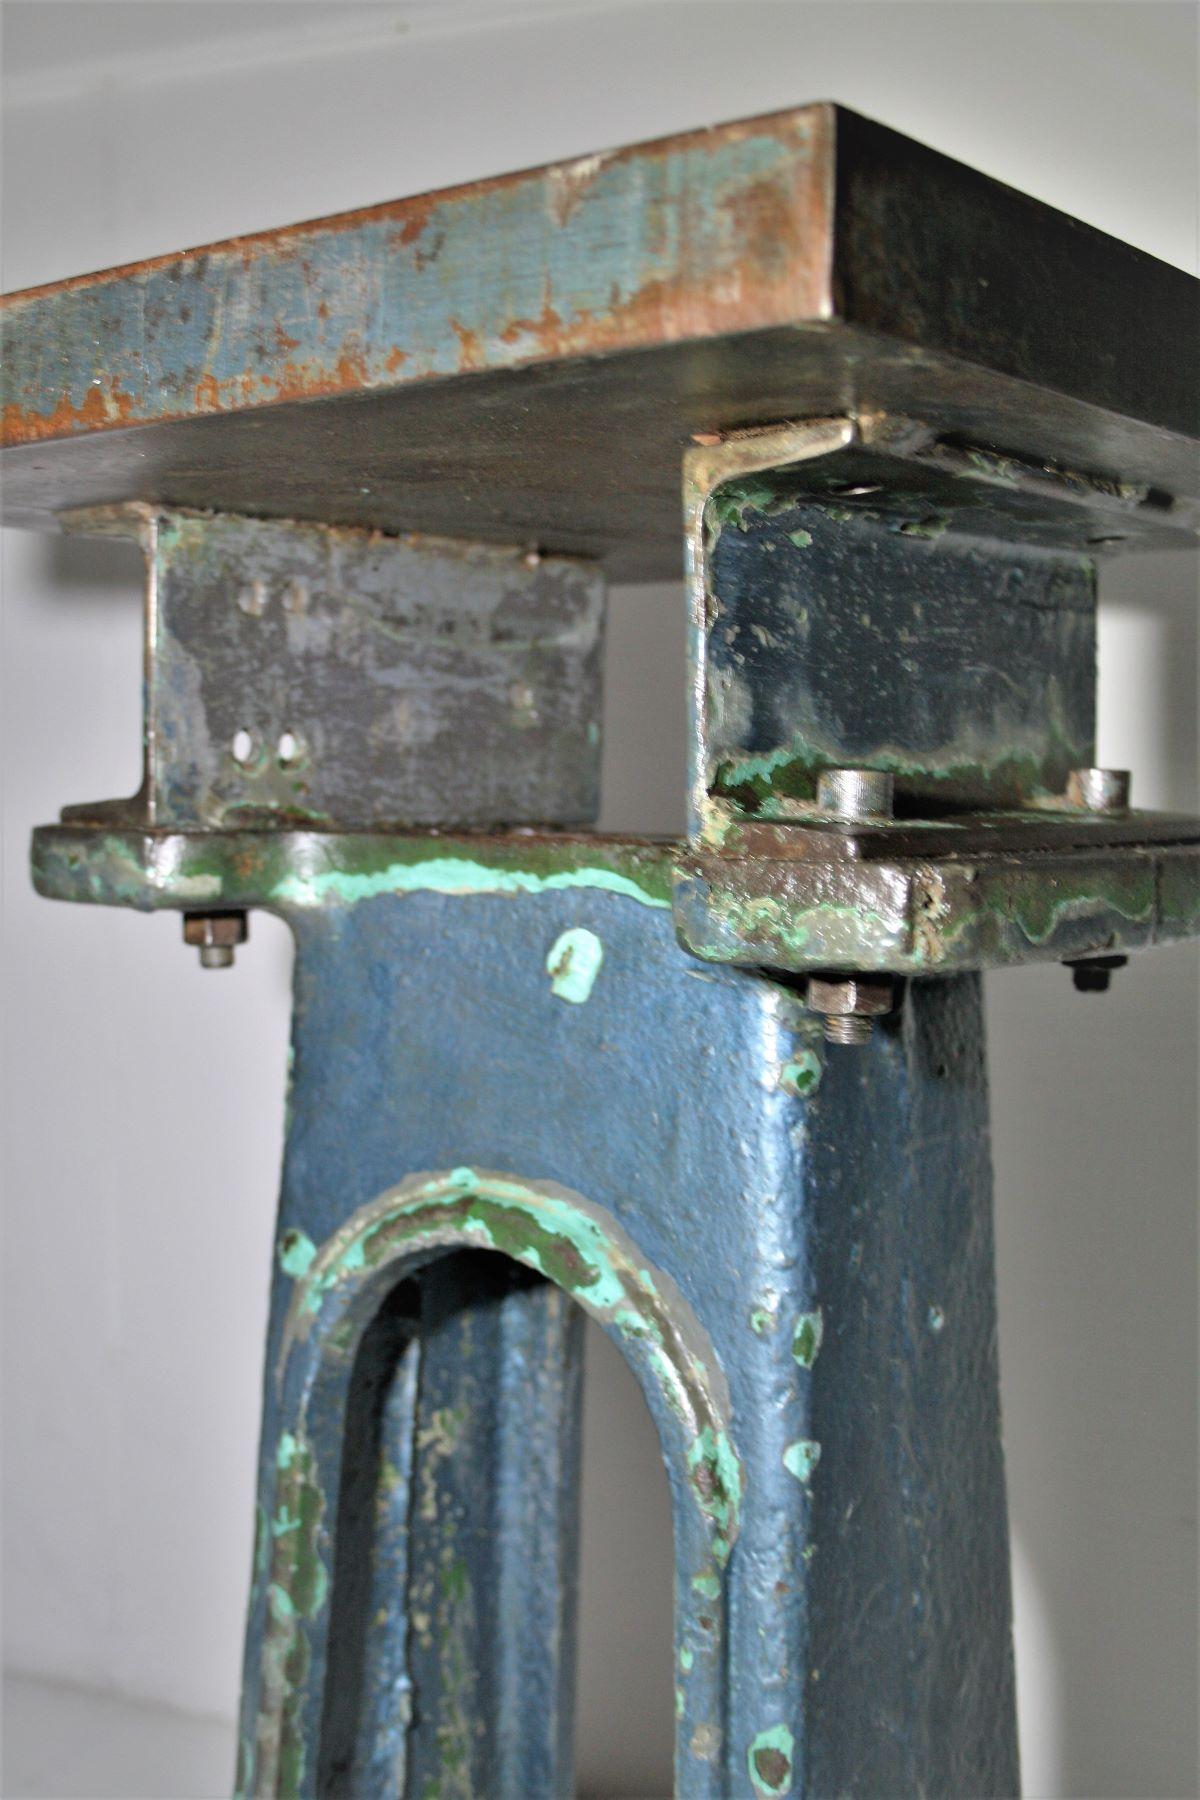 British Small Industrial Heavy Form Cat Iron Engineers Table Superb Patina Colour